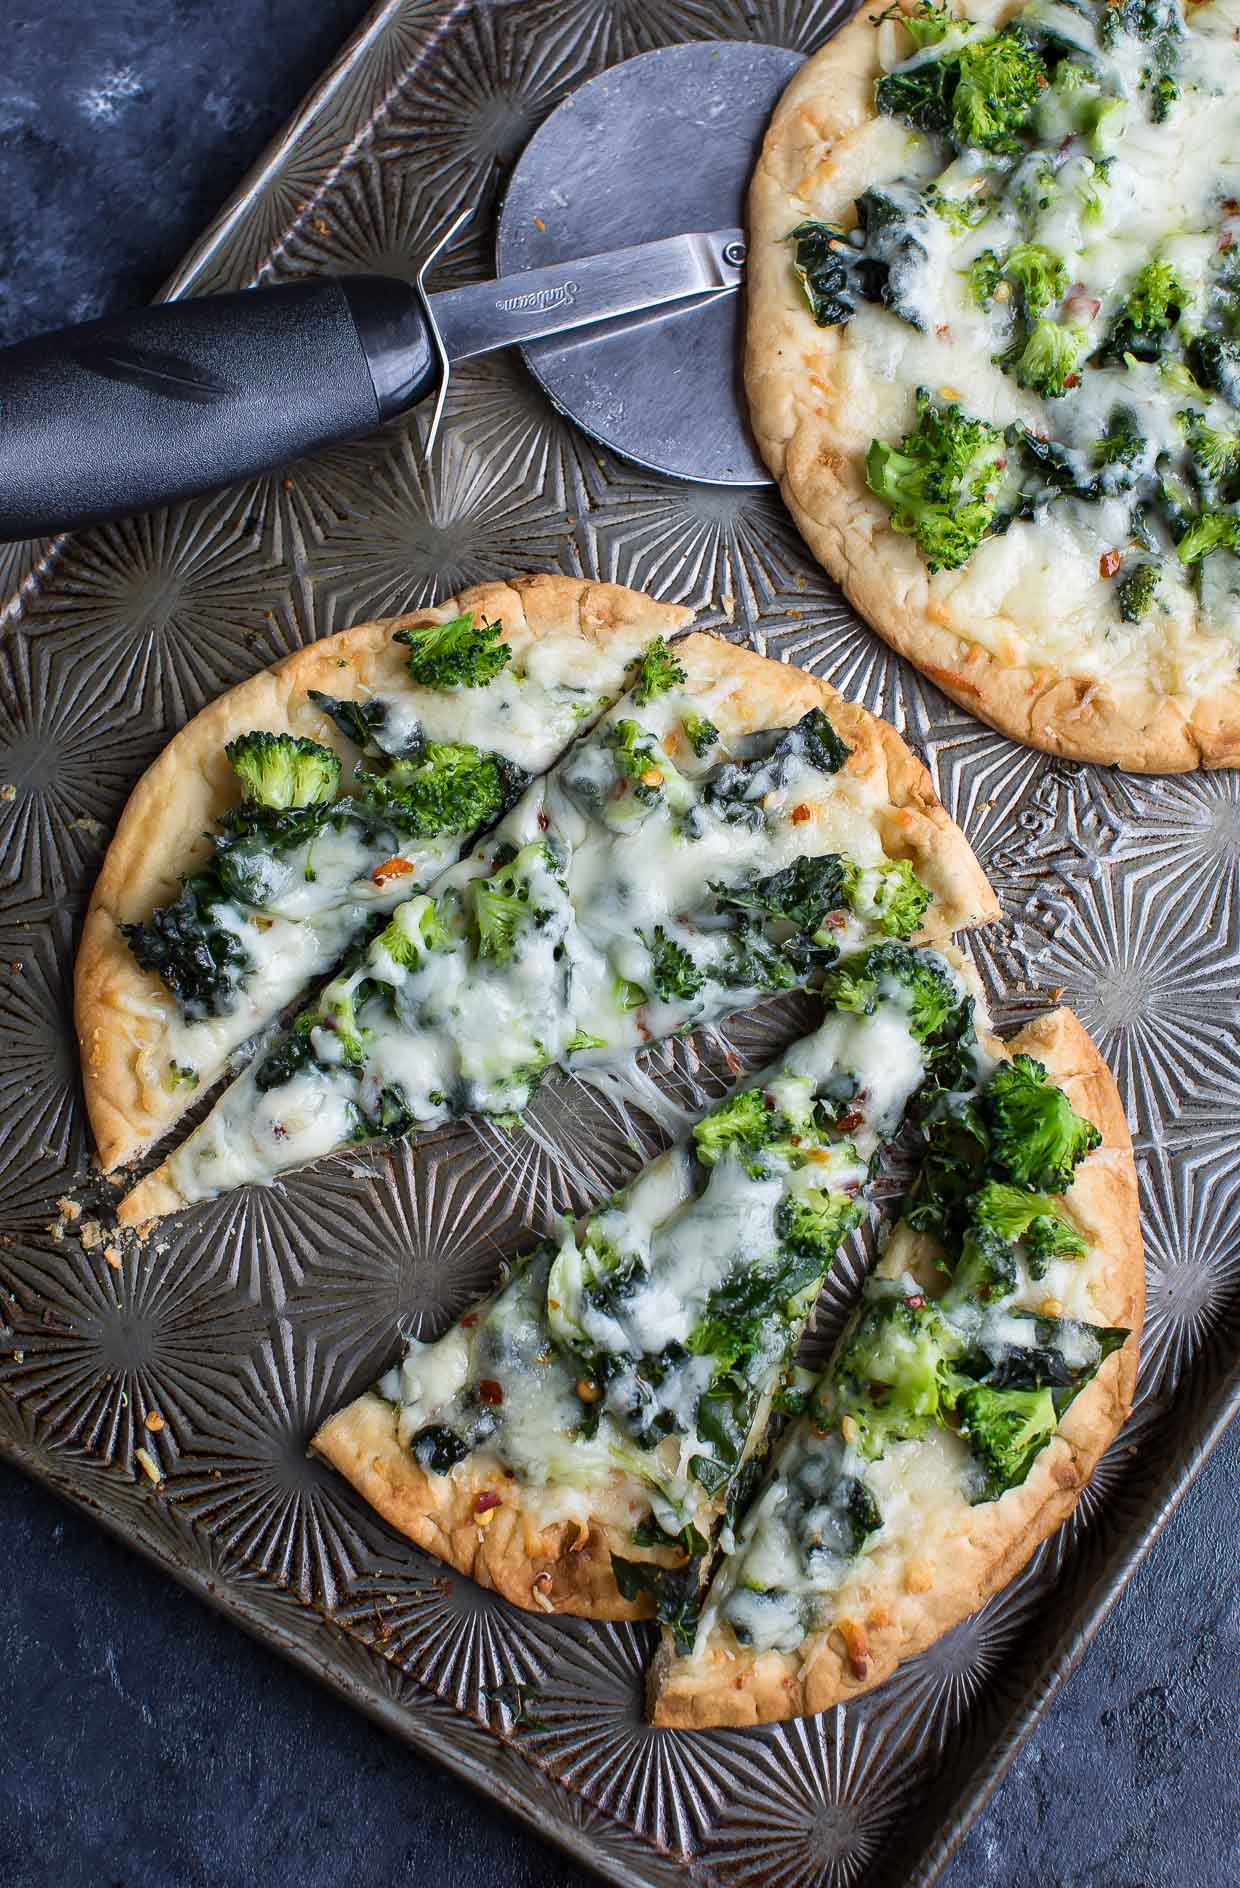 This cheesy broccoli kale pesto pizza uses store bought flatbread for a fast and flavorful personal pizza, perfect for busy weekdays!